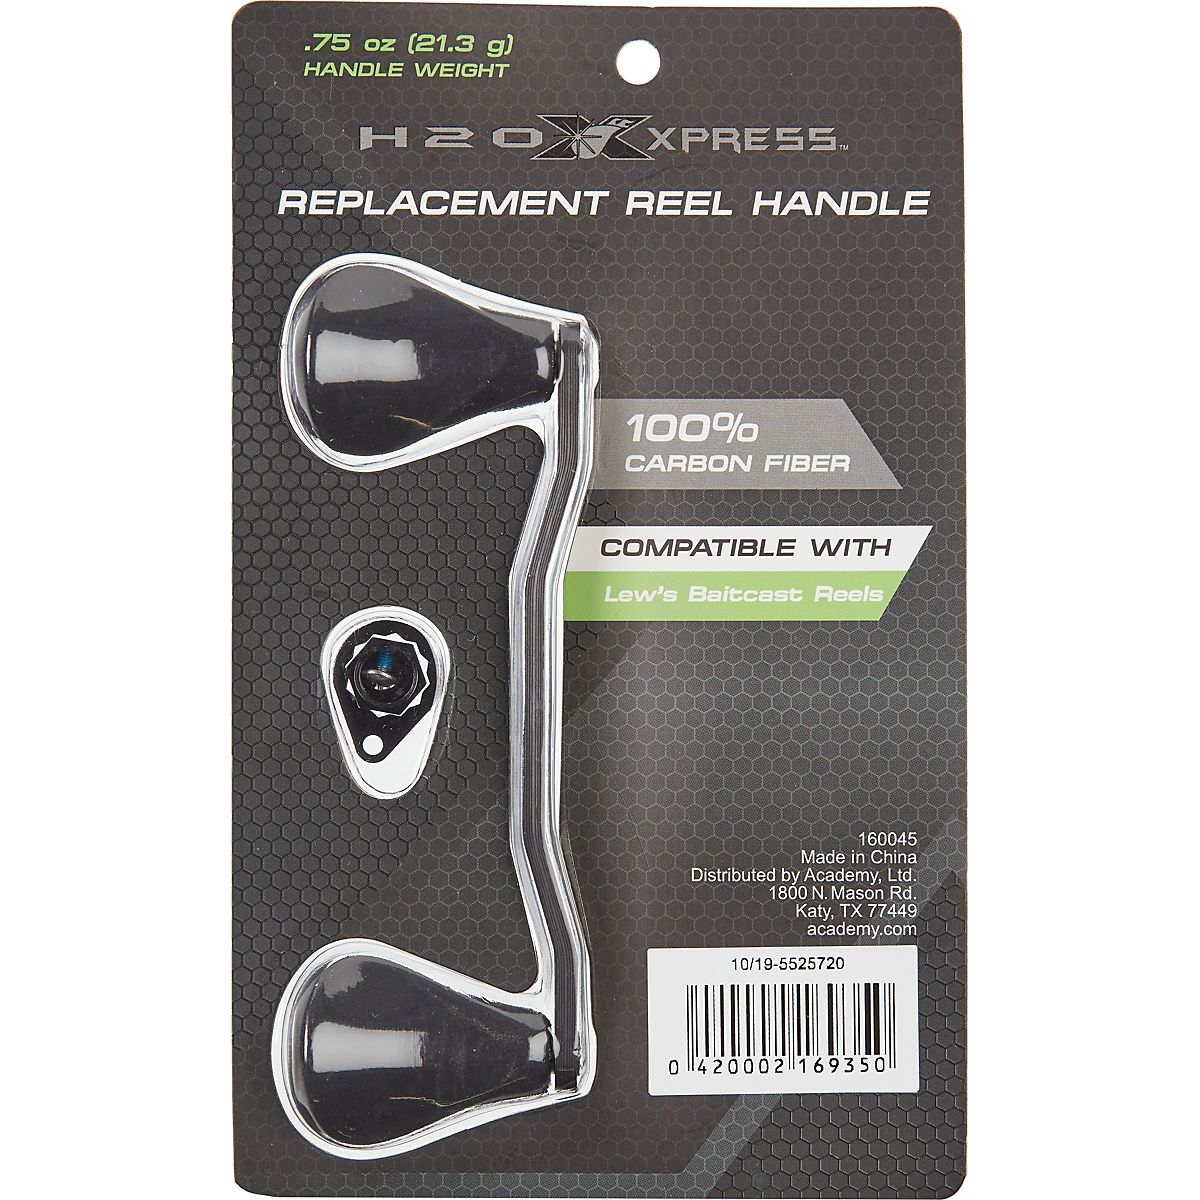 H2O XPRESS Lew's Replacement Handle